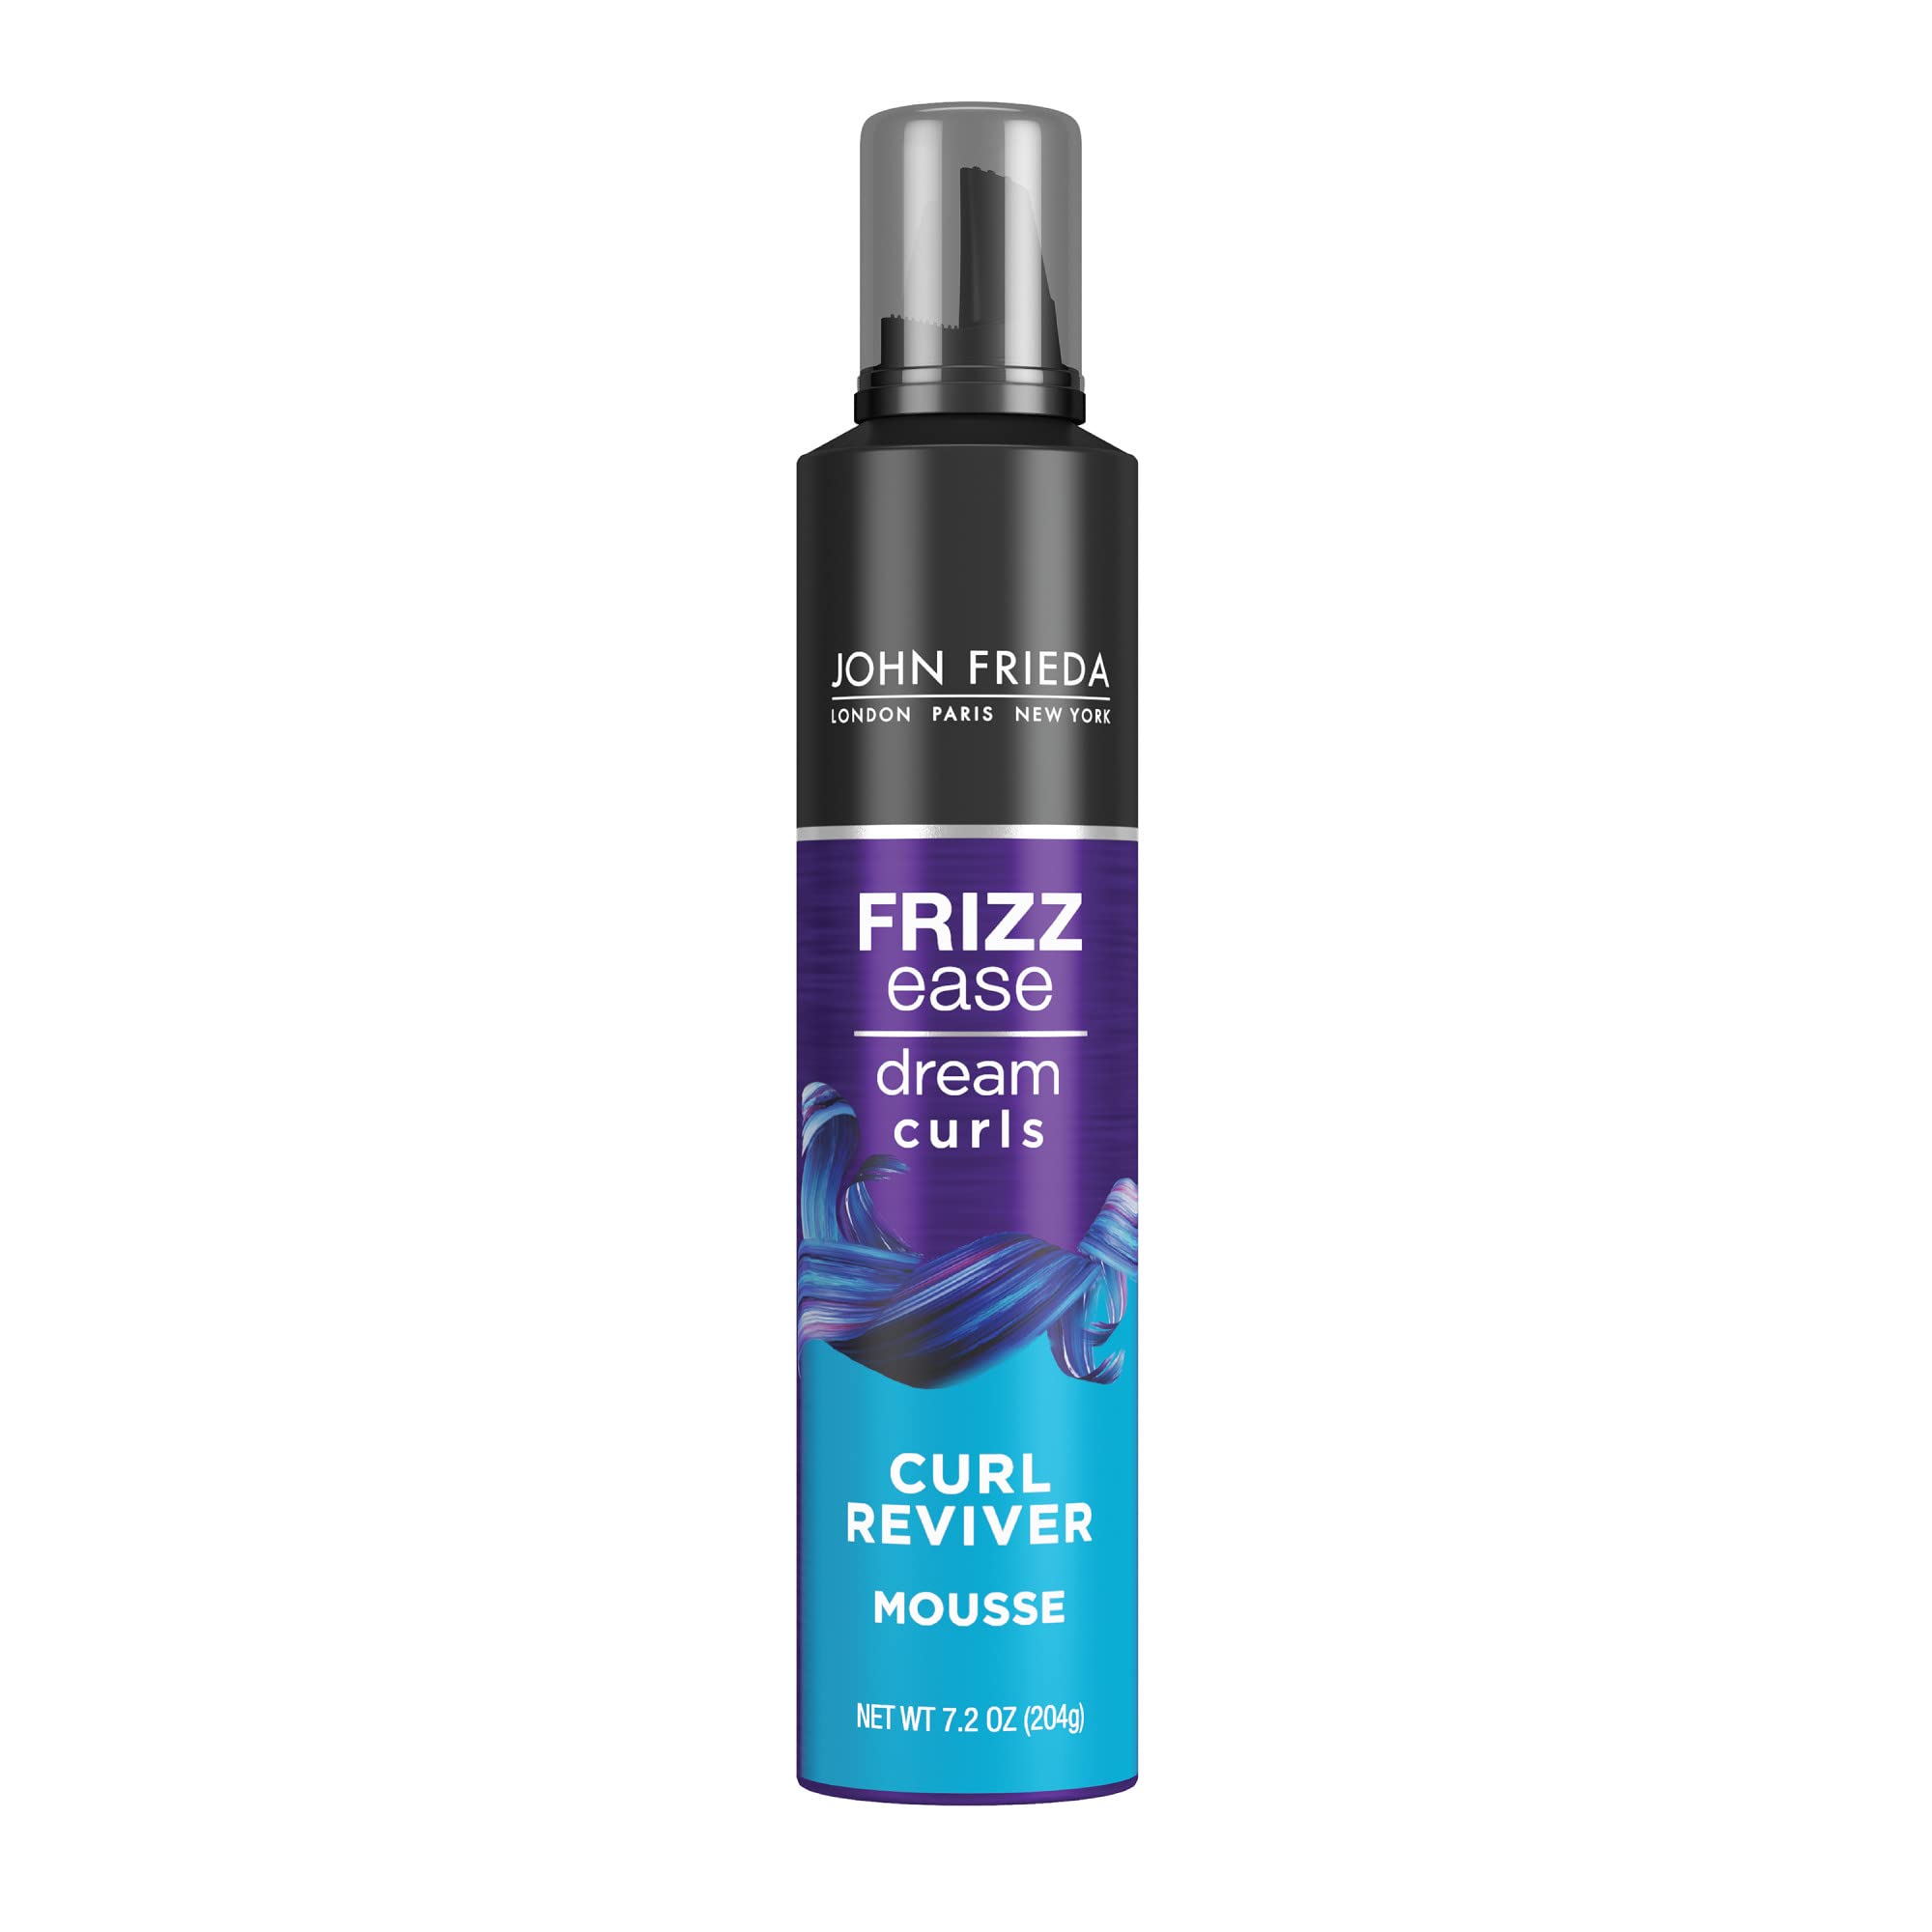 John Frieda Frizz Ease Curl Reviver Mousse, Enhances Curls, Soft Flexible  Hold, Mousse for Curly or